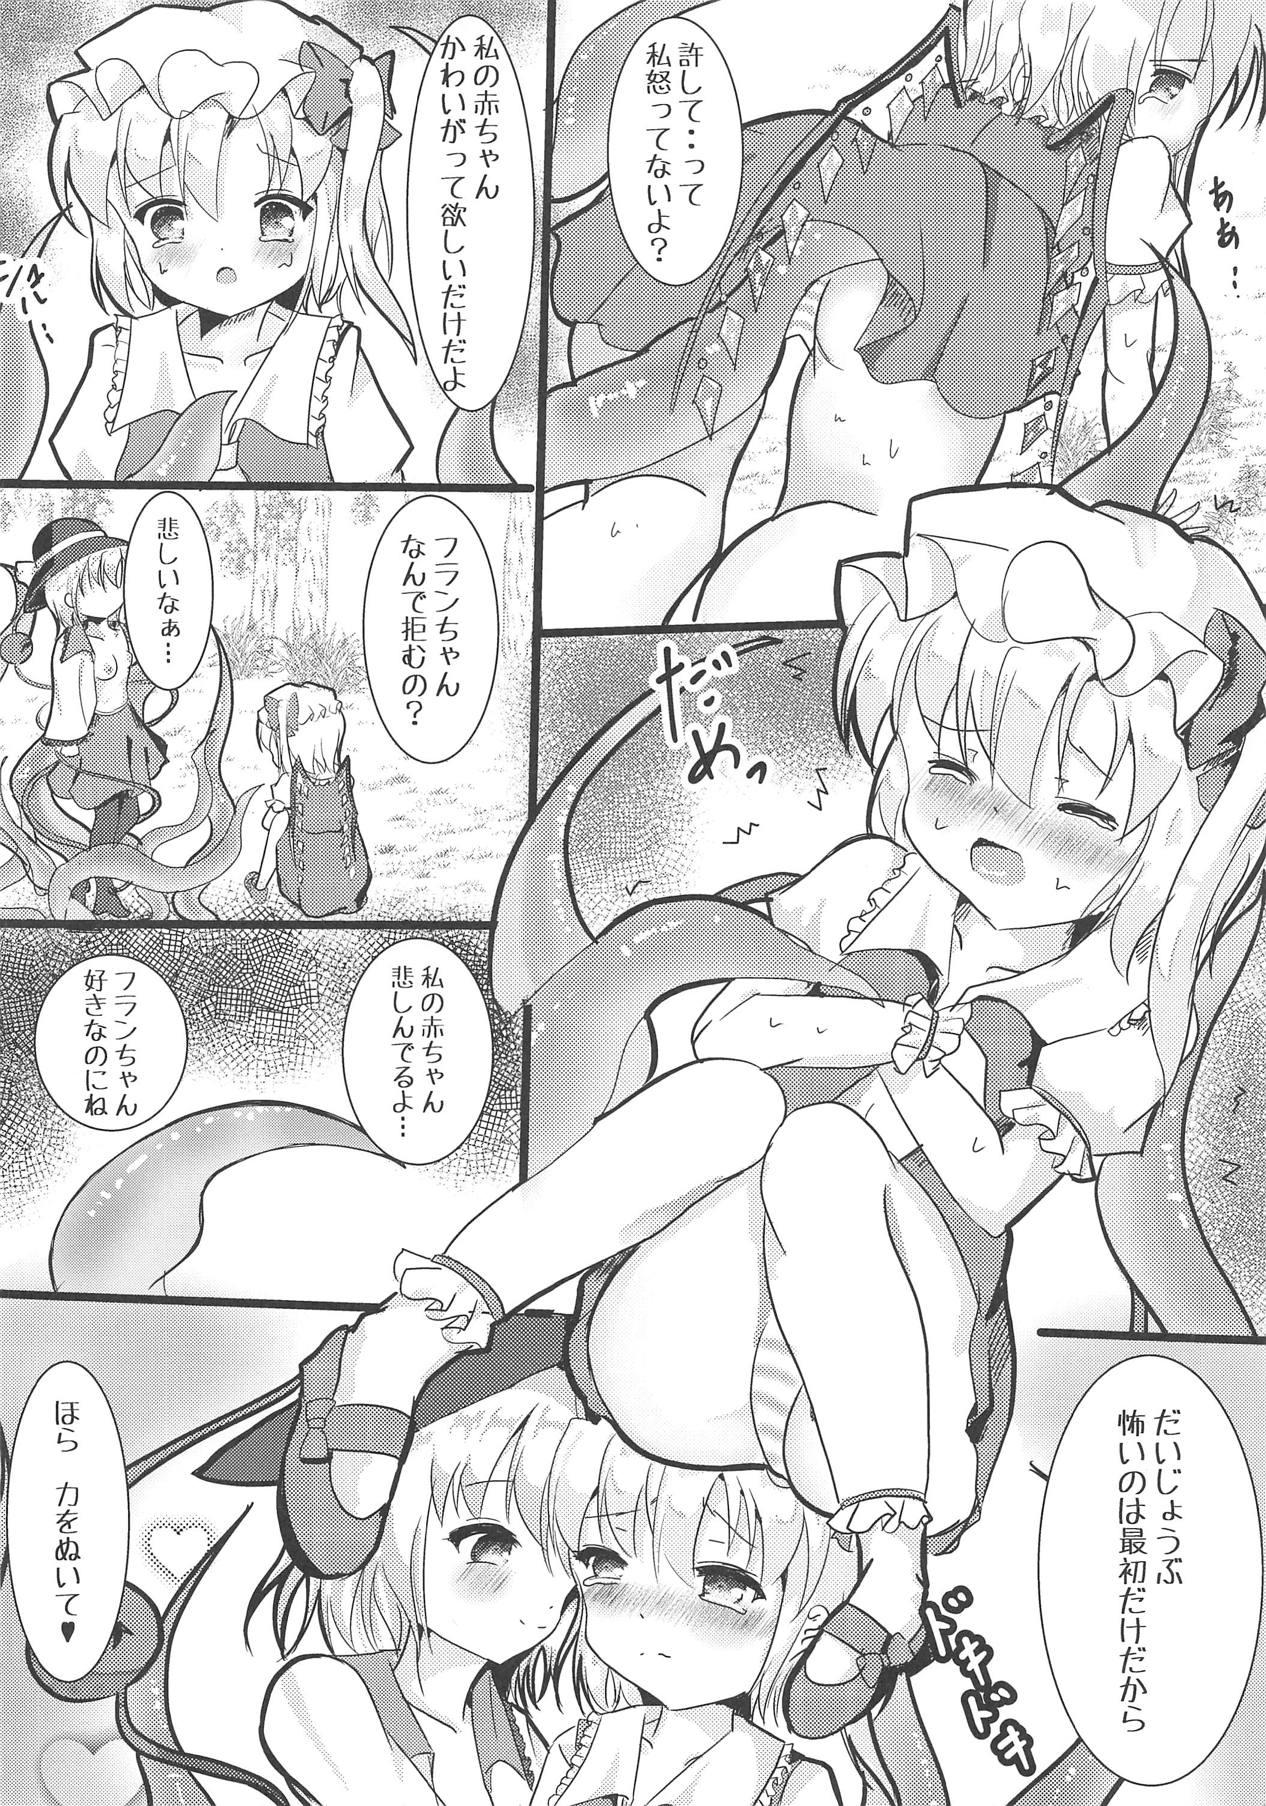 Home KoiFla! Tentacle - Touhou project Glamour Porn - Page 7